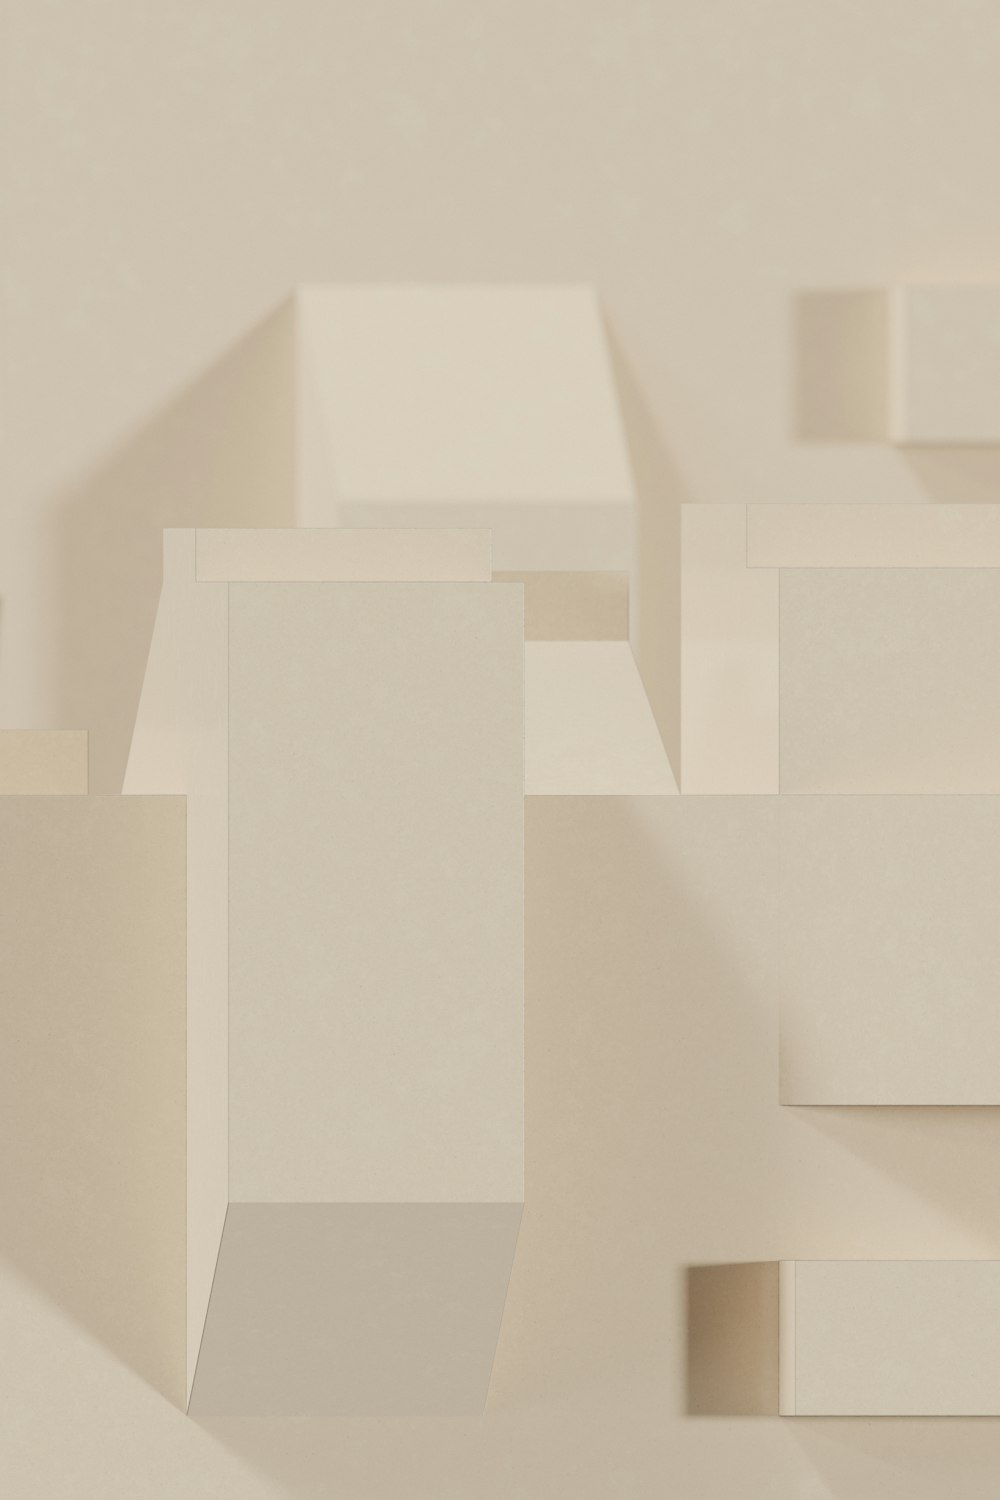 a group of white cubes sitting next to each other